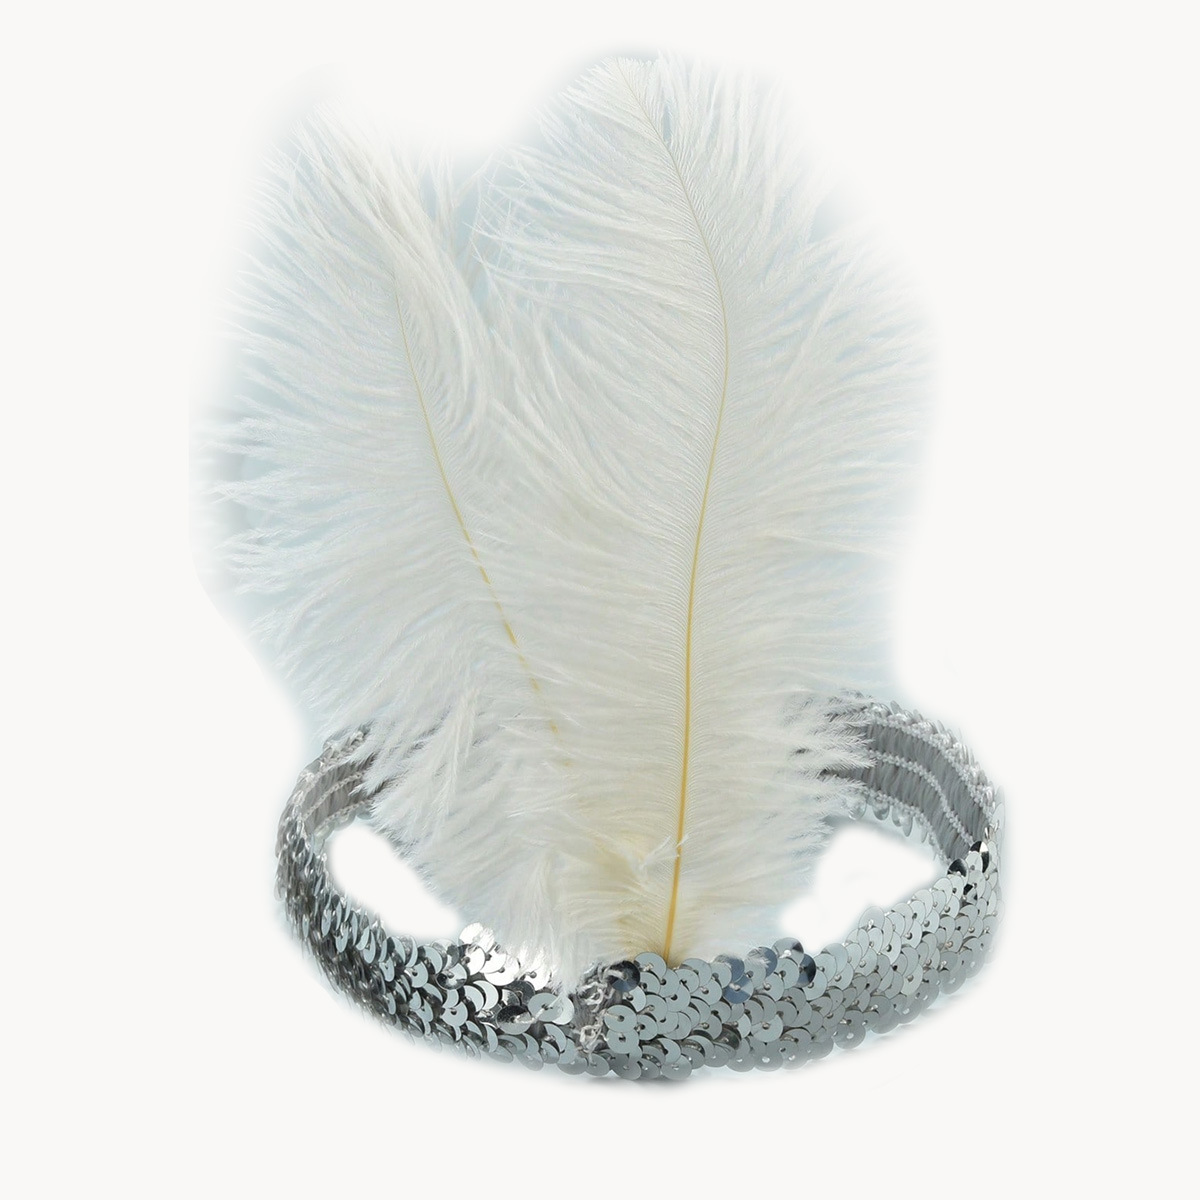 Great Gatsby Masquerade Feather Sequins Halloween Carnival Party Gathering Vintage Headband